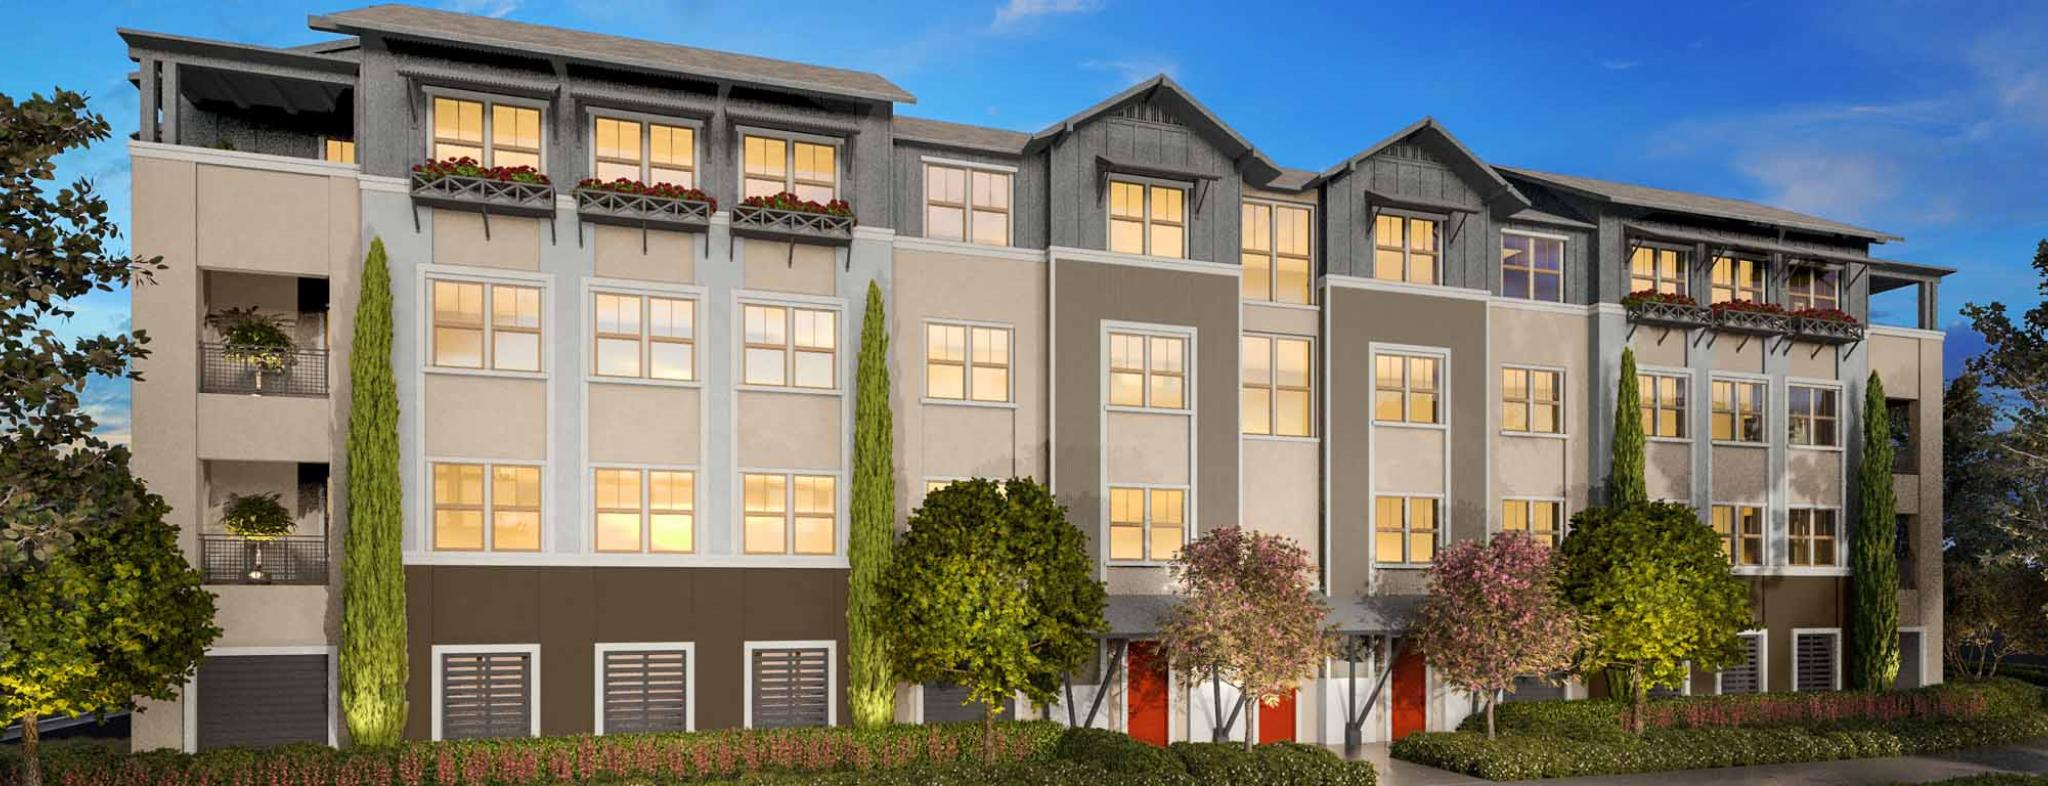 The Cannery Completes Sales at Two Neighborhoods, Breaks Ground and Prepares for Sales Release at Final Collection of Unique Single-Story Residences